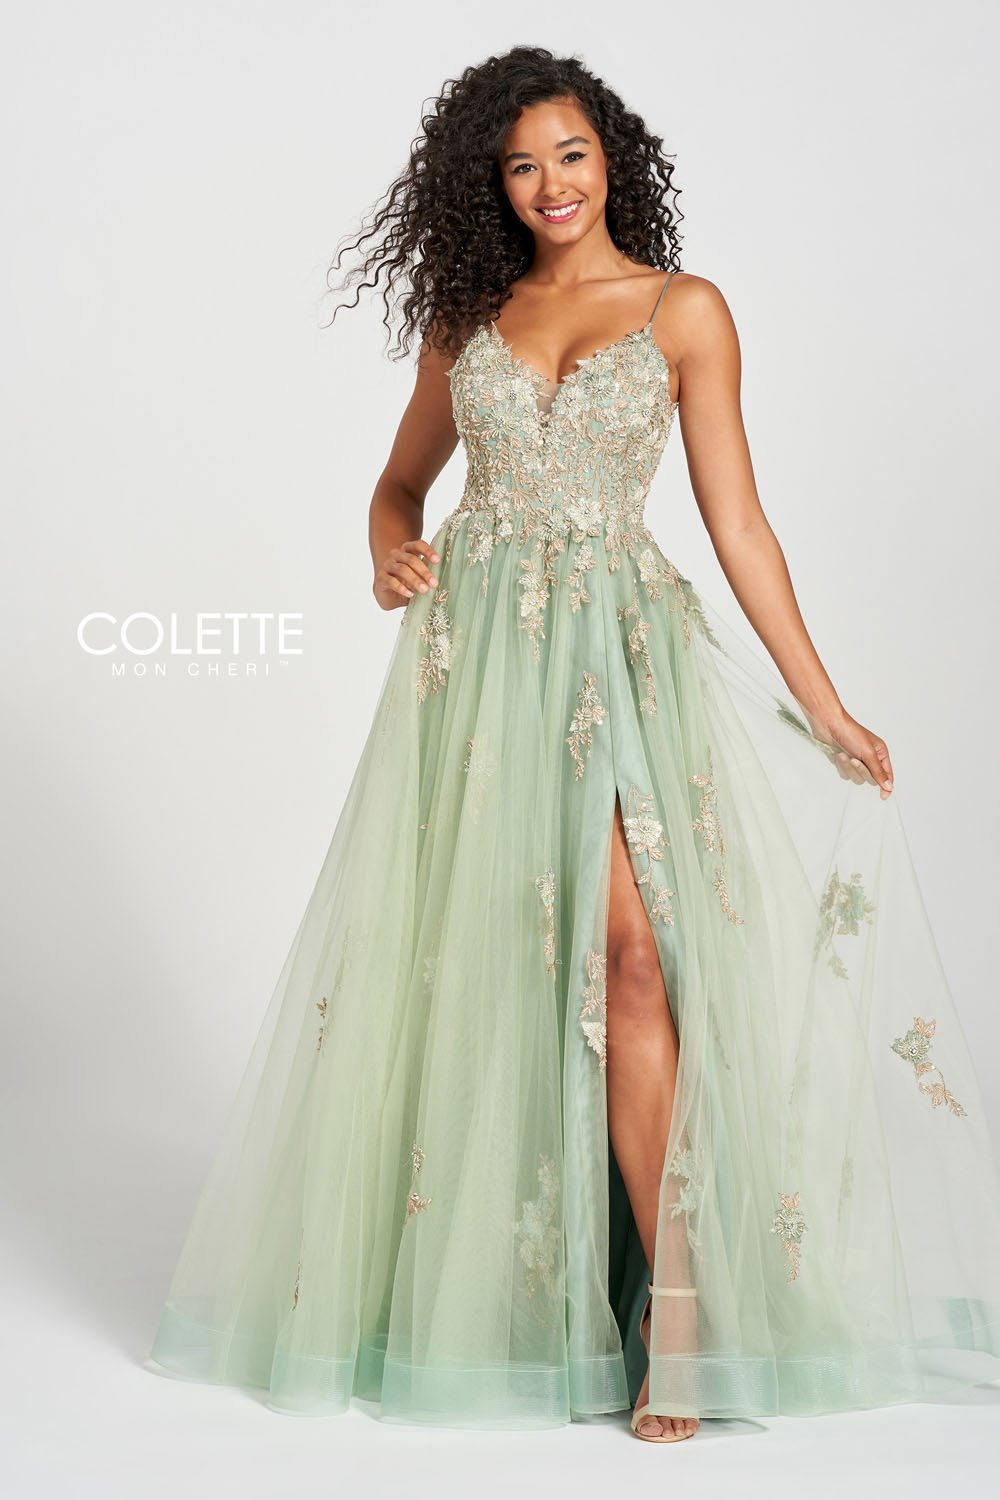 Colette CL12207 Ivy prom dresses.  Ivy prom dresses image by Colette.